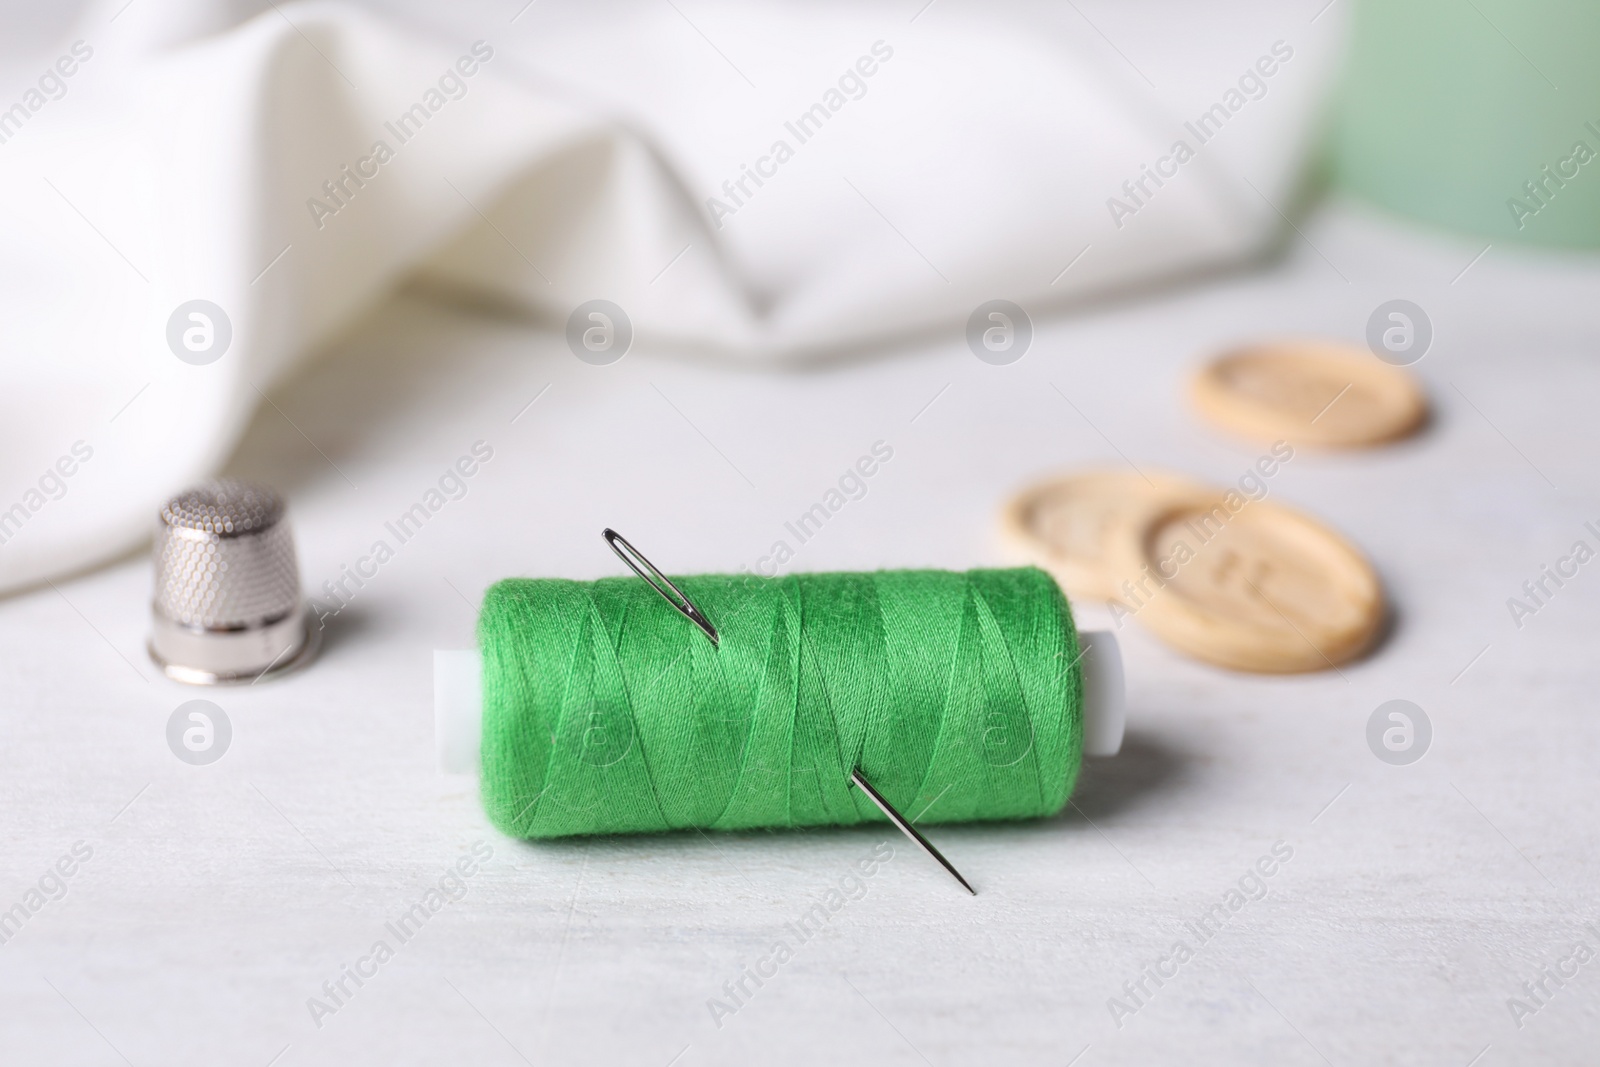 Photo of Spool of green sewing thread with needle, thimble and buttons on white table